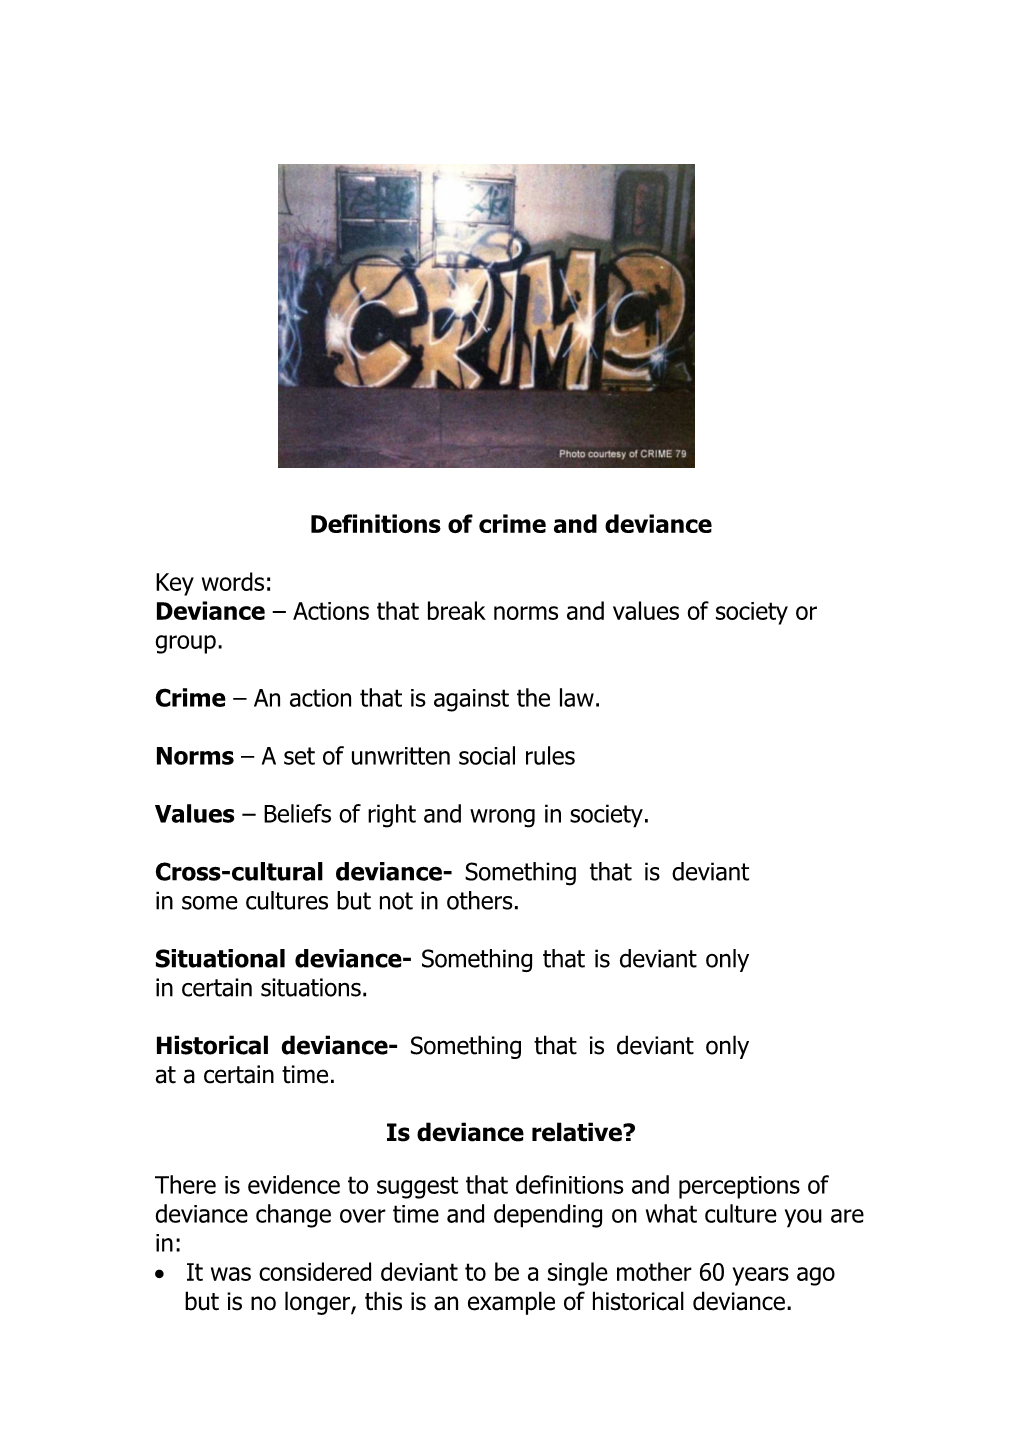 Definitions of Crime and Deviance